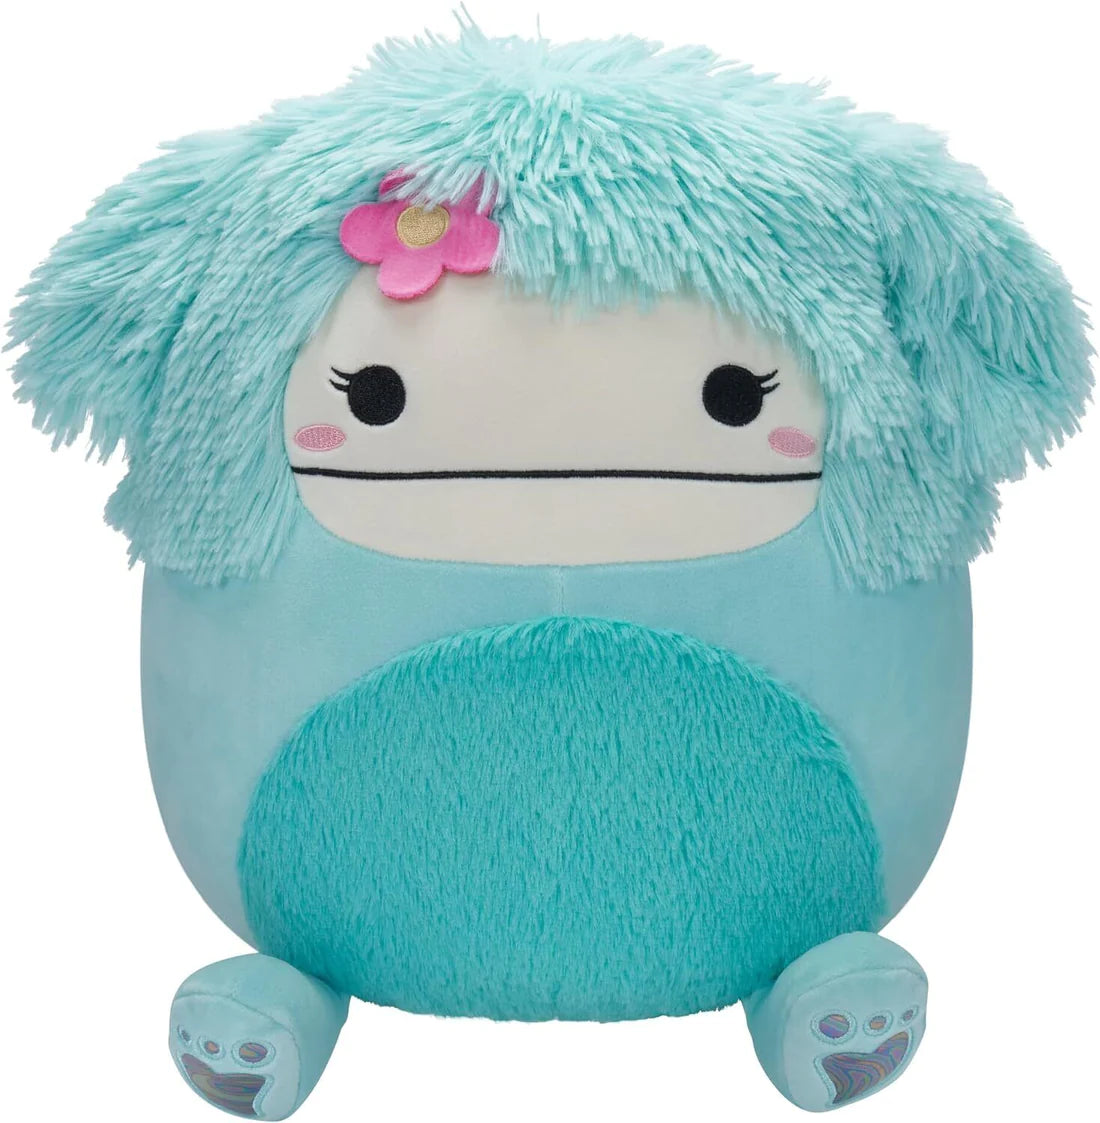 SQUISHMALLOWS Original 12-Inch NEW EXCITED COLLECTION - JOELLE